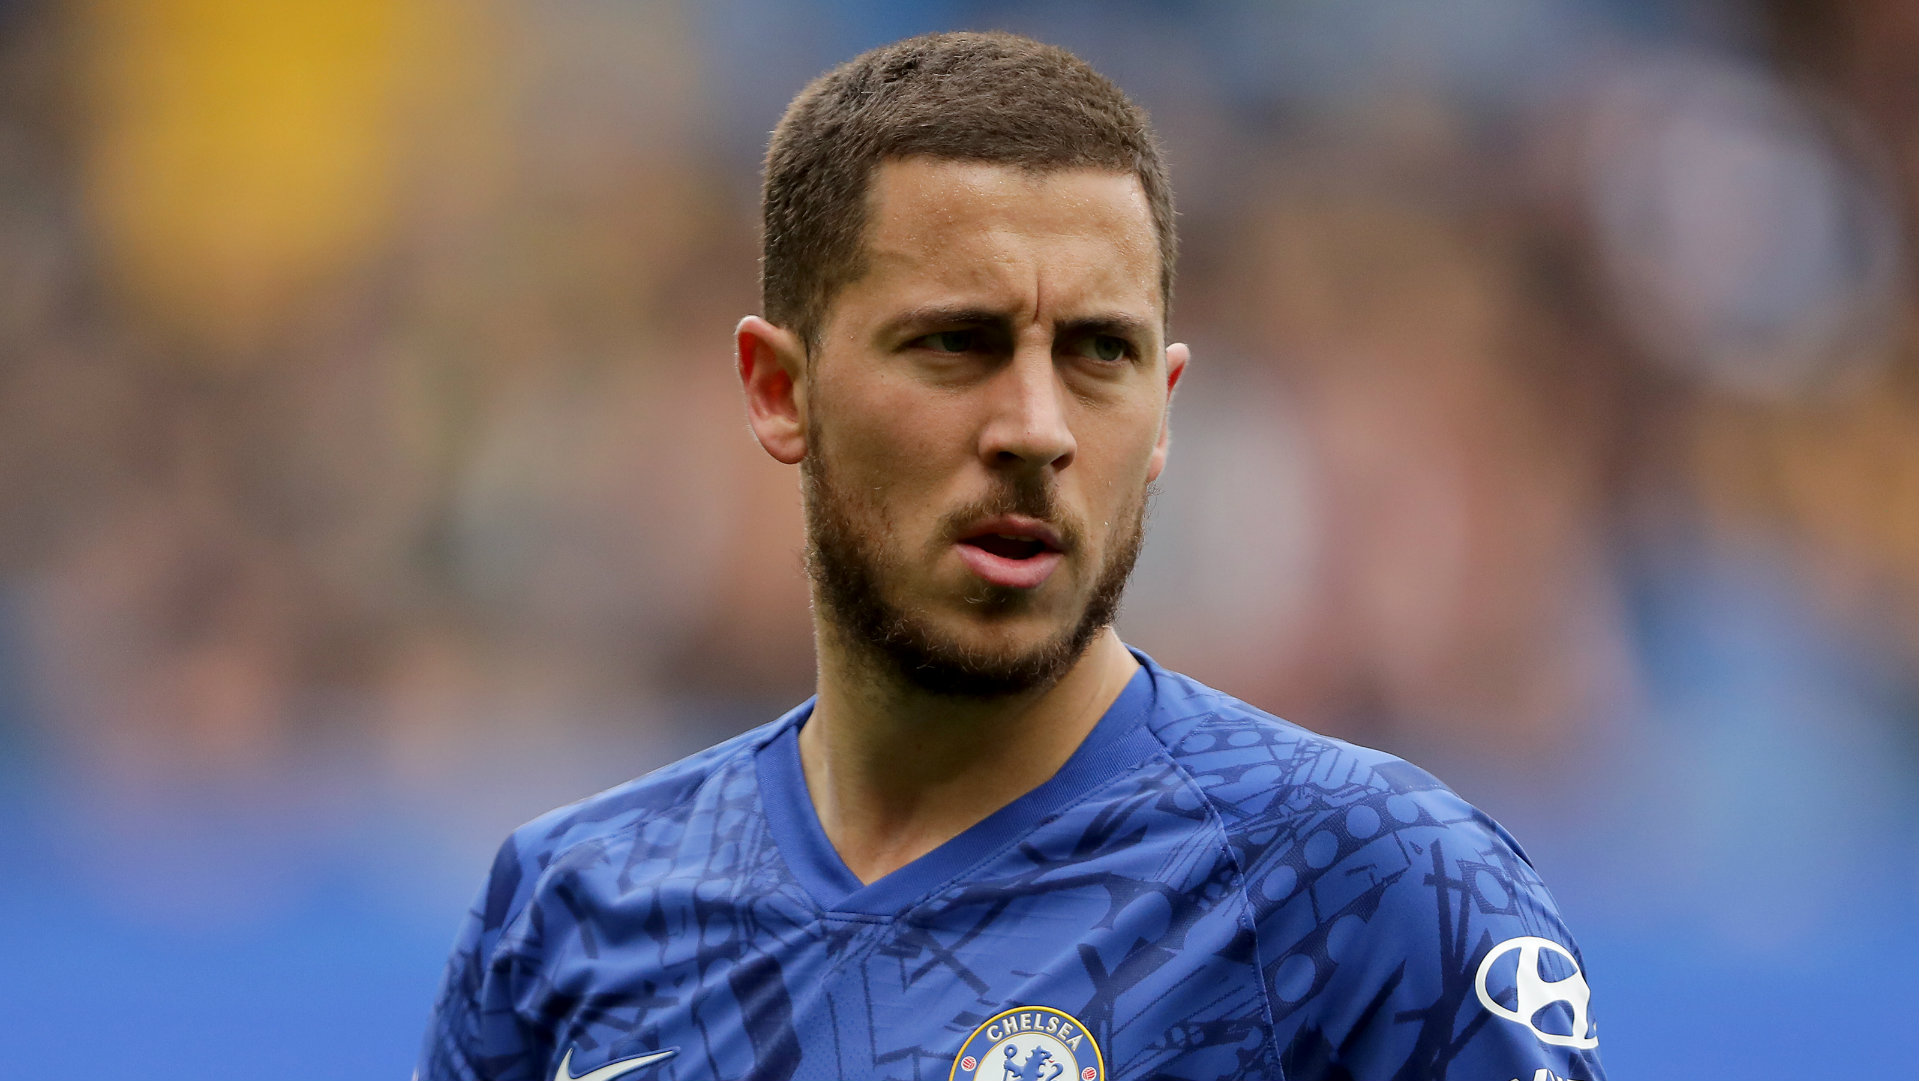 Transfer news and rumours LIVE: Chelsea to allow Hazard to join Real Madrid | Goal.com1919 x 1081